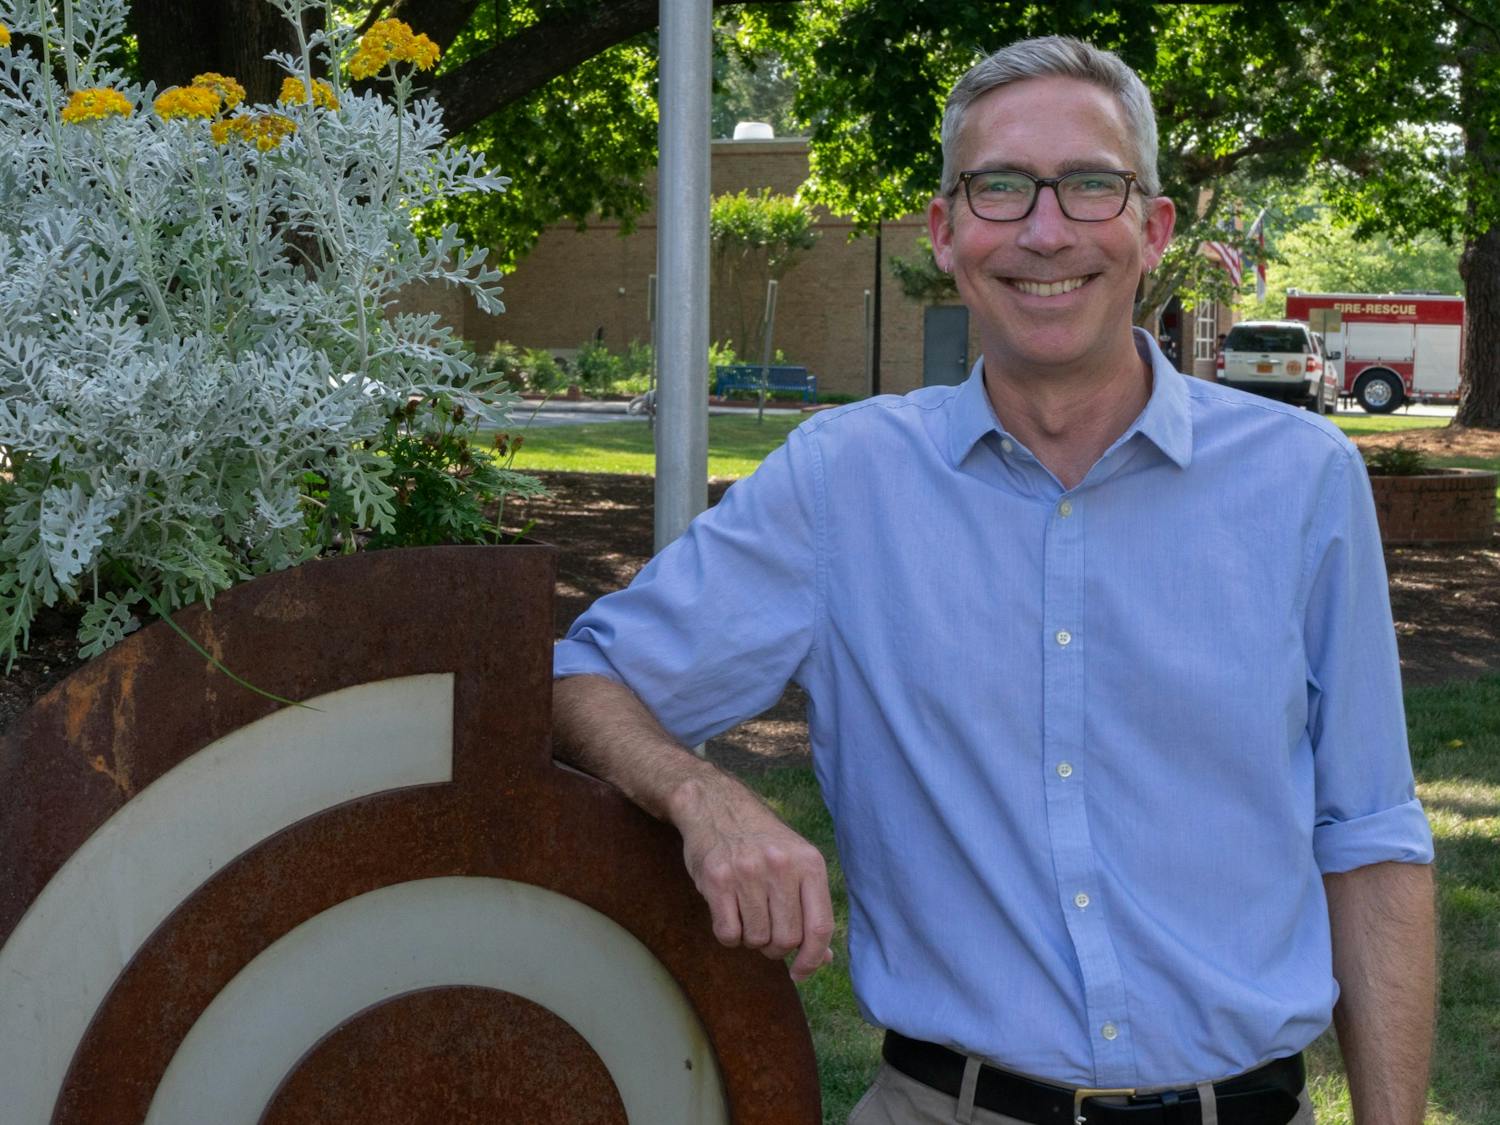 Damon Seils, Carrboro council member, poses beside the Carrboro Town Hall sign on Tuesday, June 8, 2021. Seils announced he is running for Mayor of Carrboro.